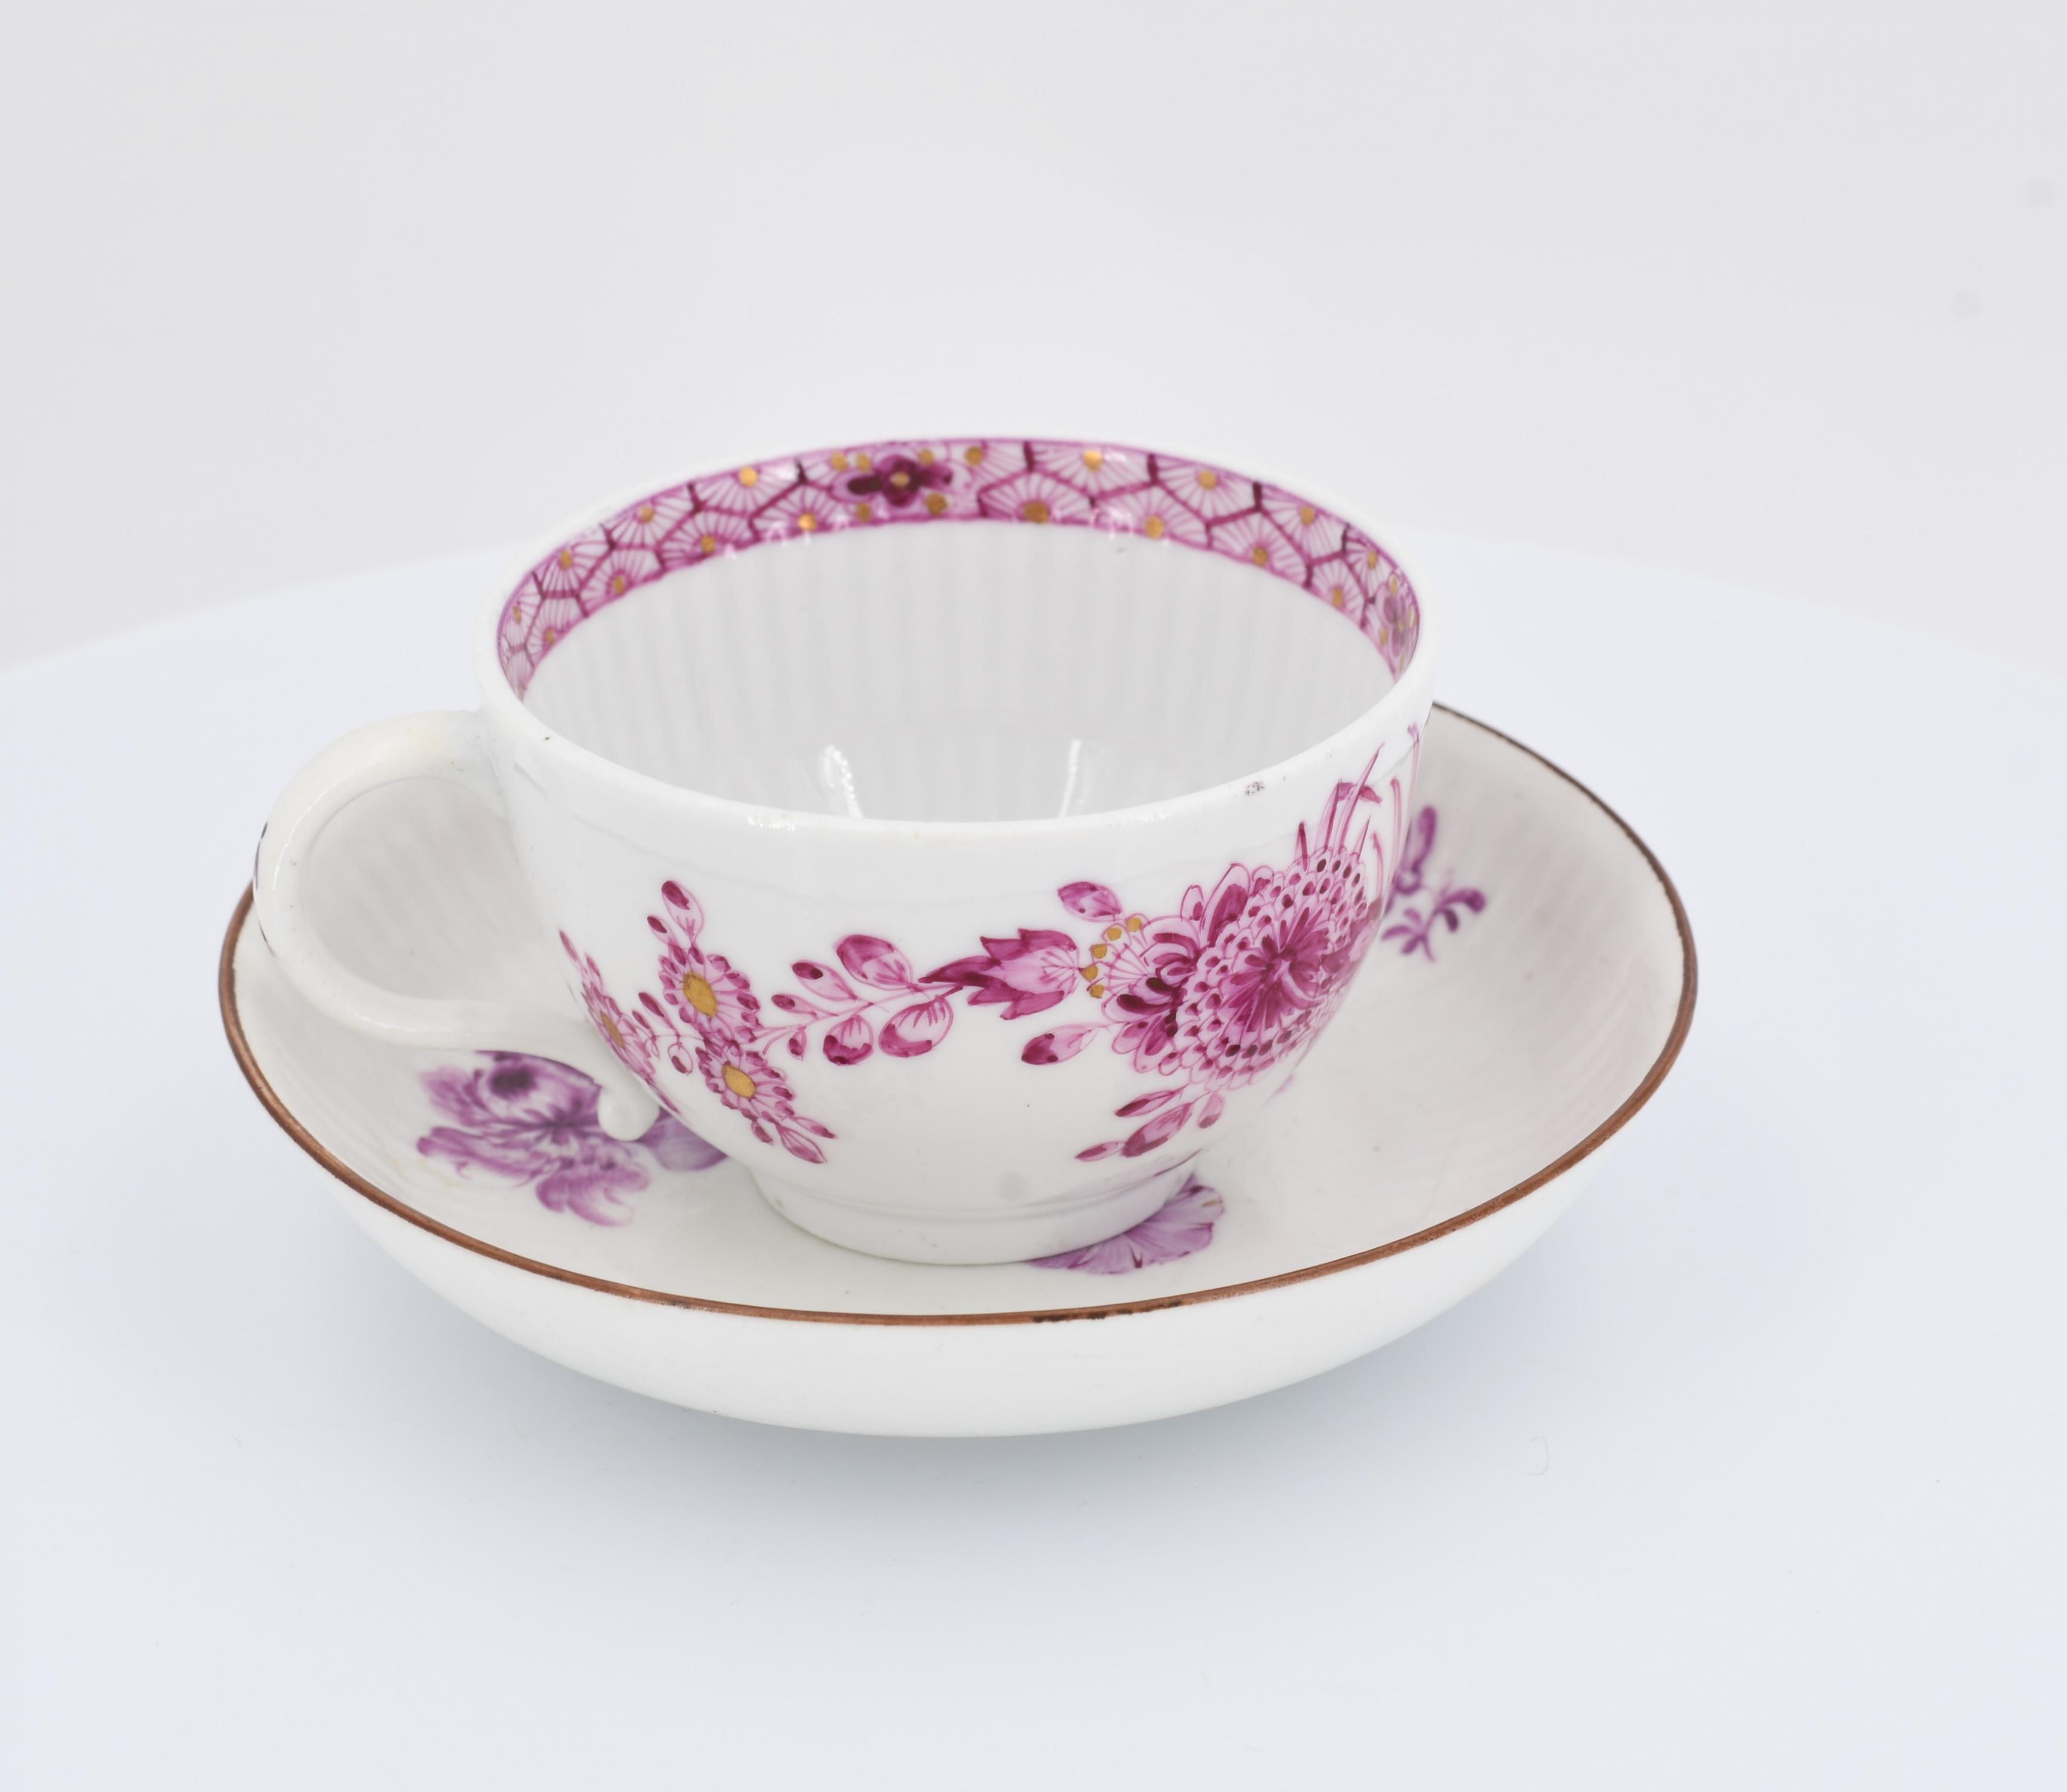 Two cups and saucers with floral décor - Image 10 of 19